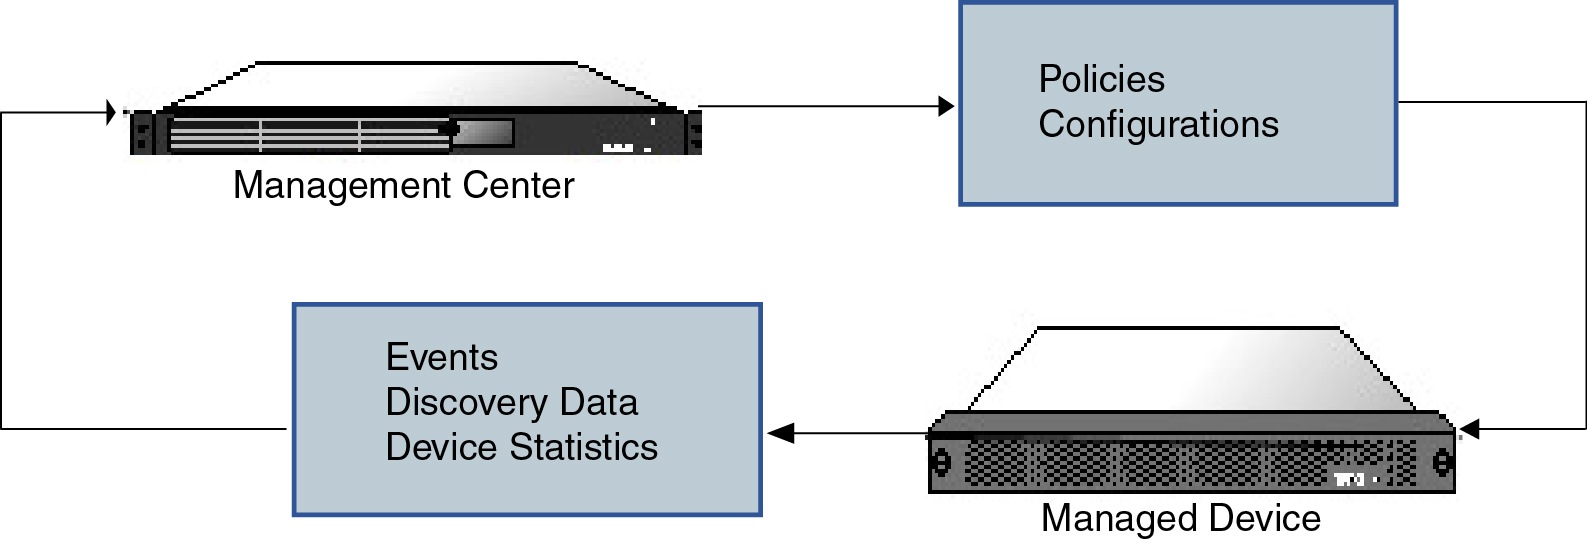 Diagram illustrating information passed between a Firepower Management Center and its managed devices. Policy and configuration information is passed from the Firepower Management Center to the managed devices. Events, discovery data, and device statistics are passed from the managed devices to the Firepower Management Center.